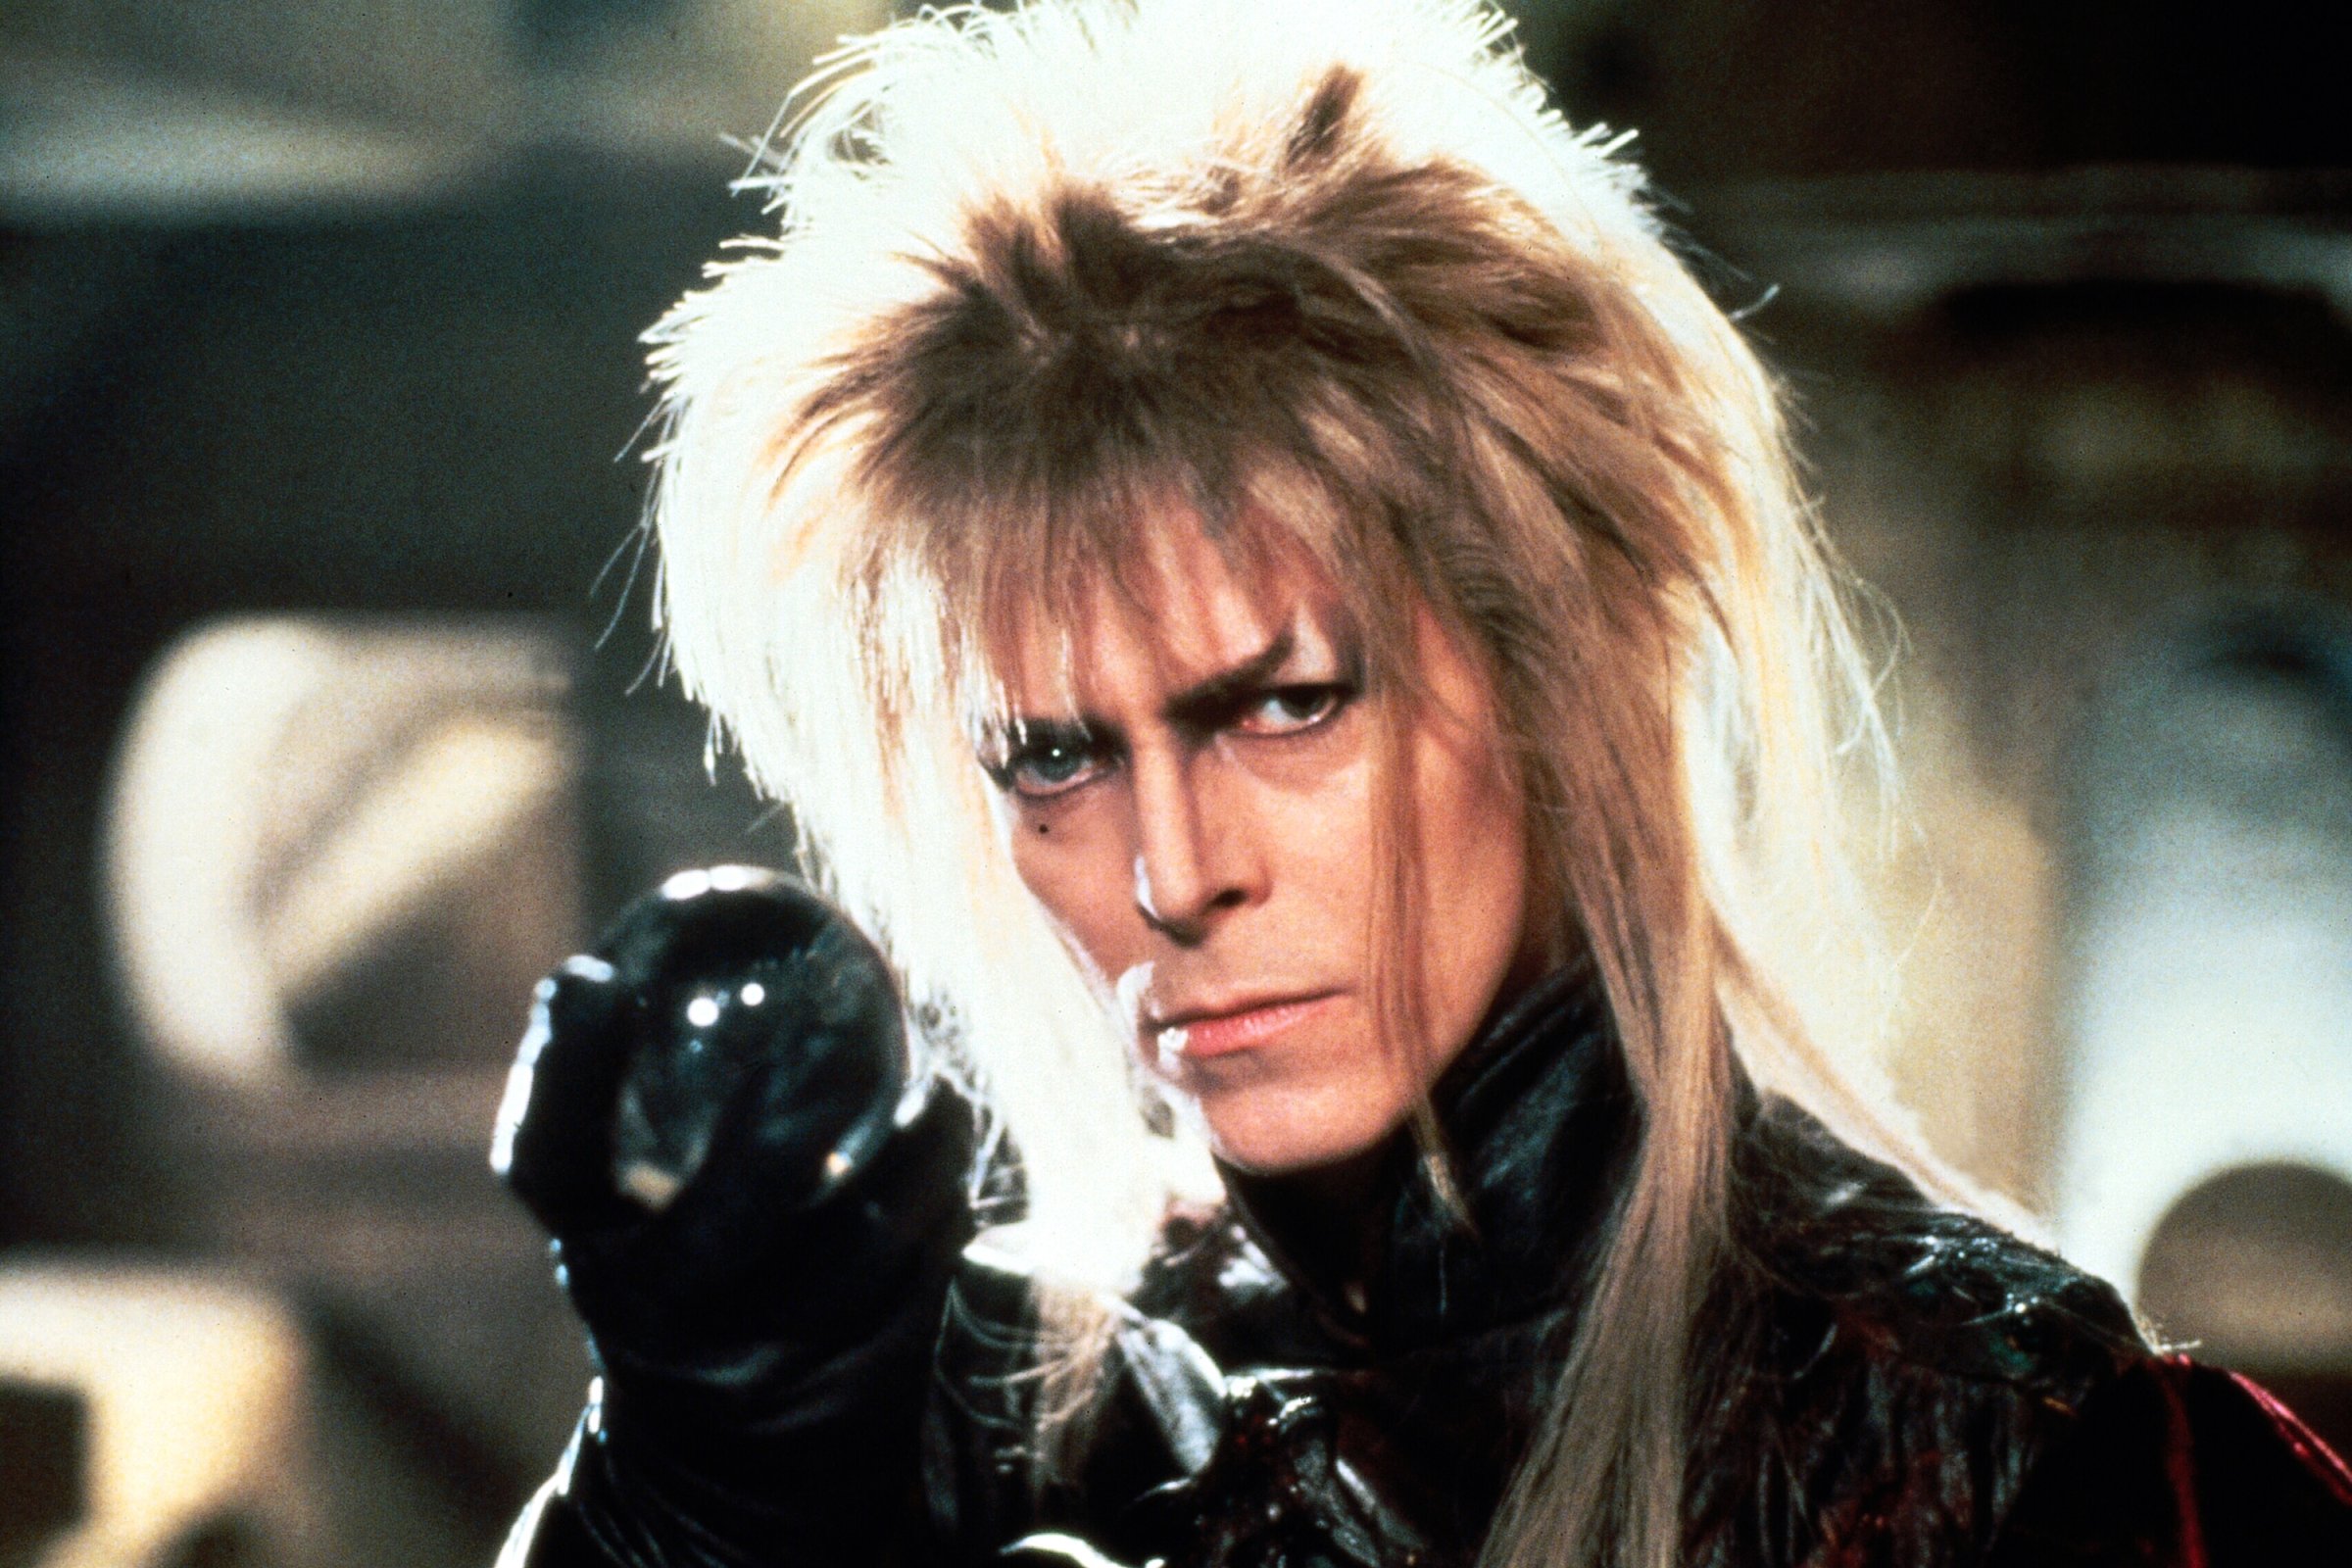 David Bowie as Jareth, the Goblin King in Labyrinth in 1986.